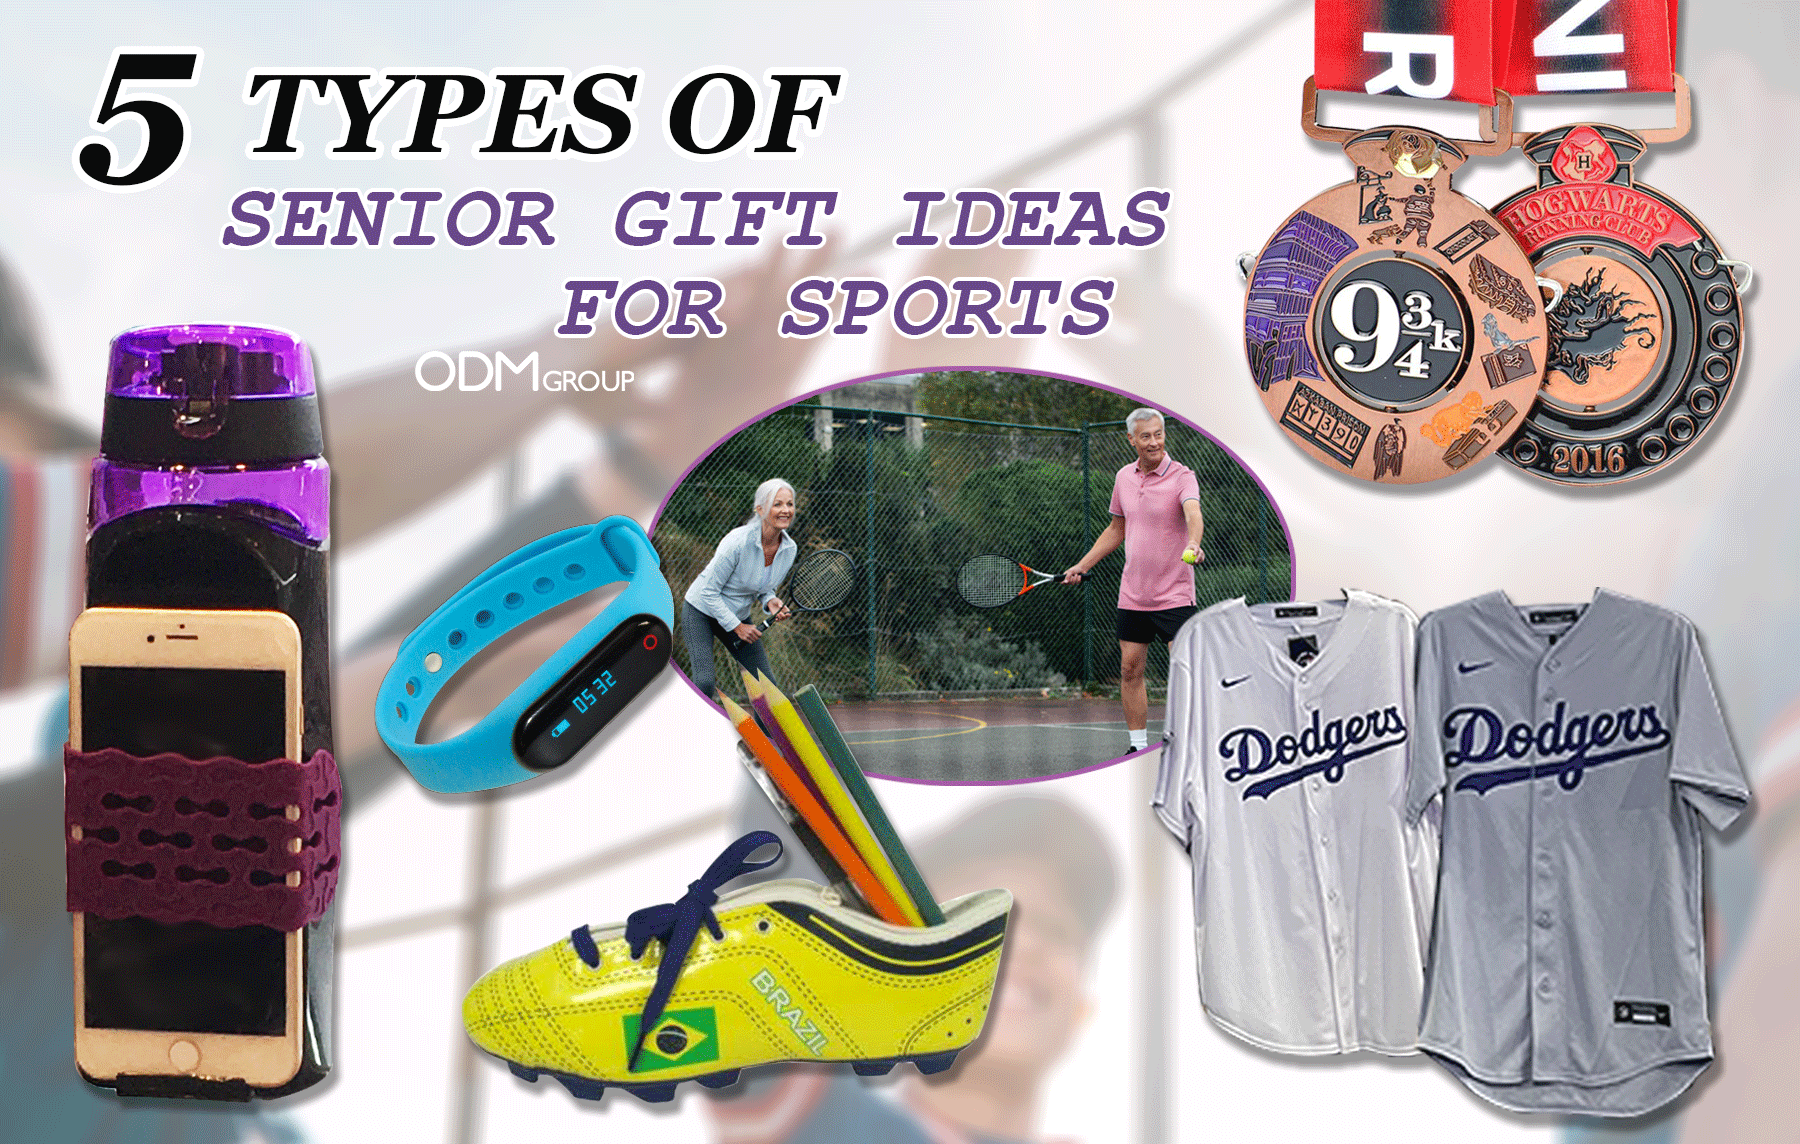 The Best Gift Ideas For Teen Boys: The Ultimate Guide - Everyday Savvy